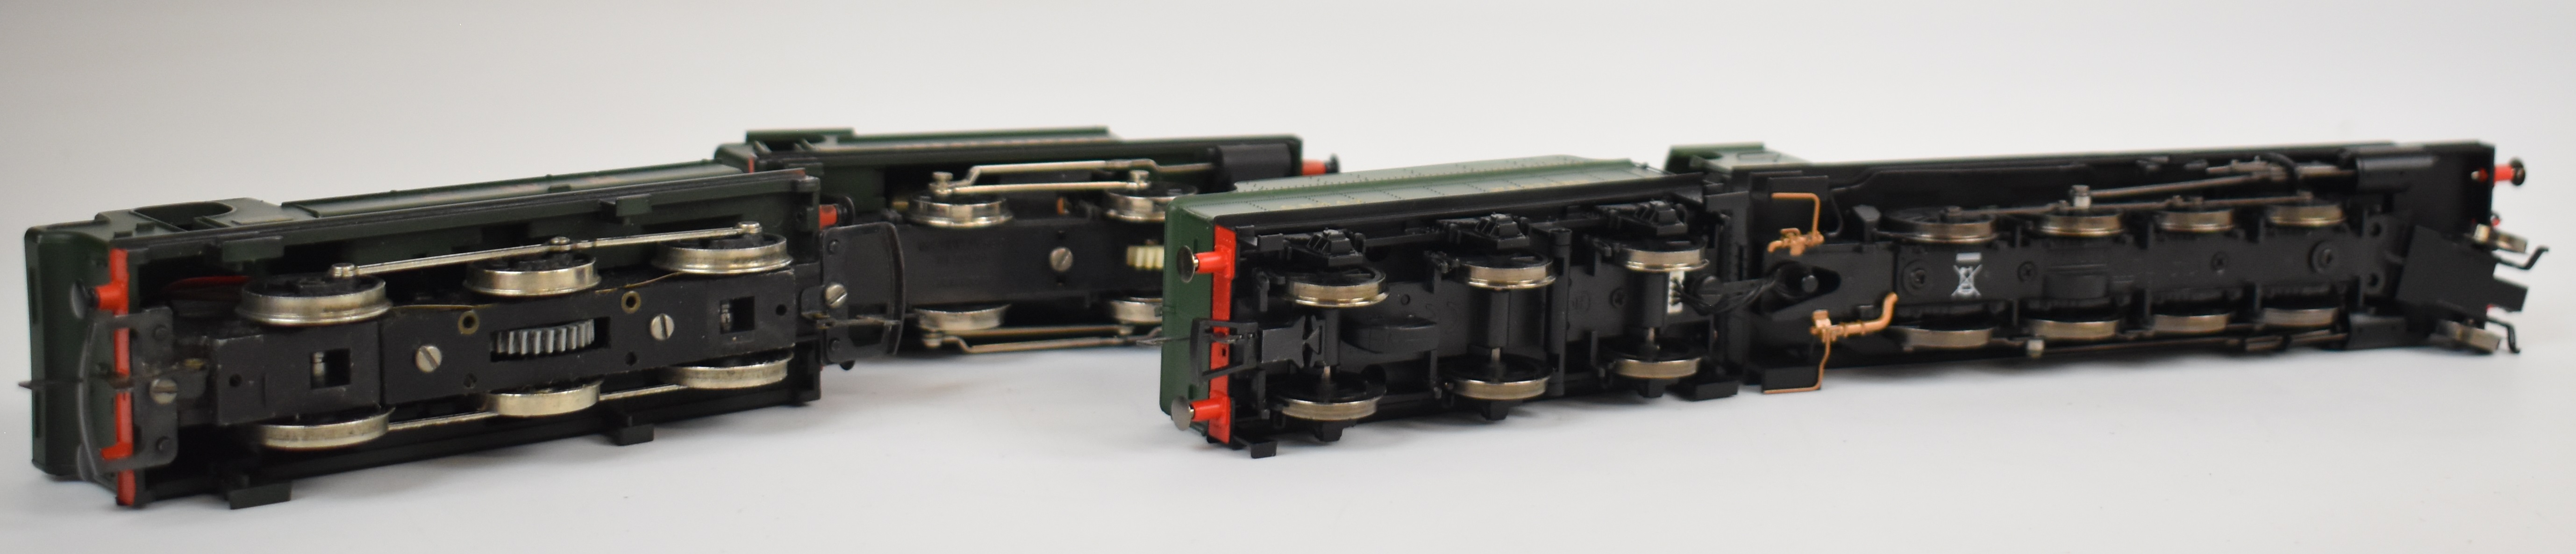 Three Hornby GWR 00 gauge model railway locomotives comprising Class 2600 R2818 and two pannier - Image 6 of 6